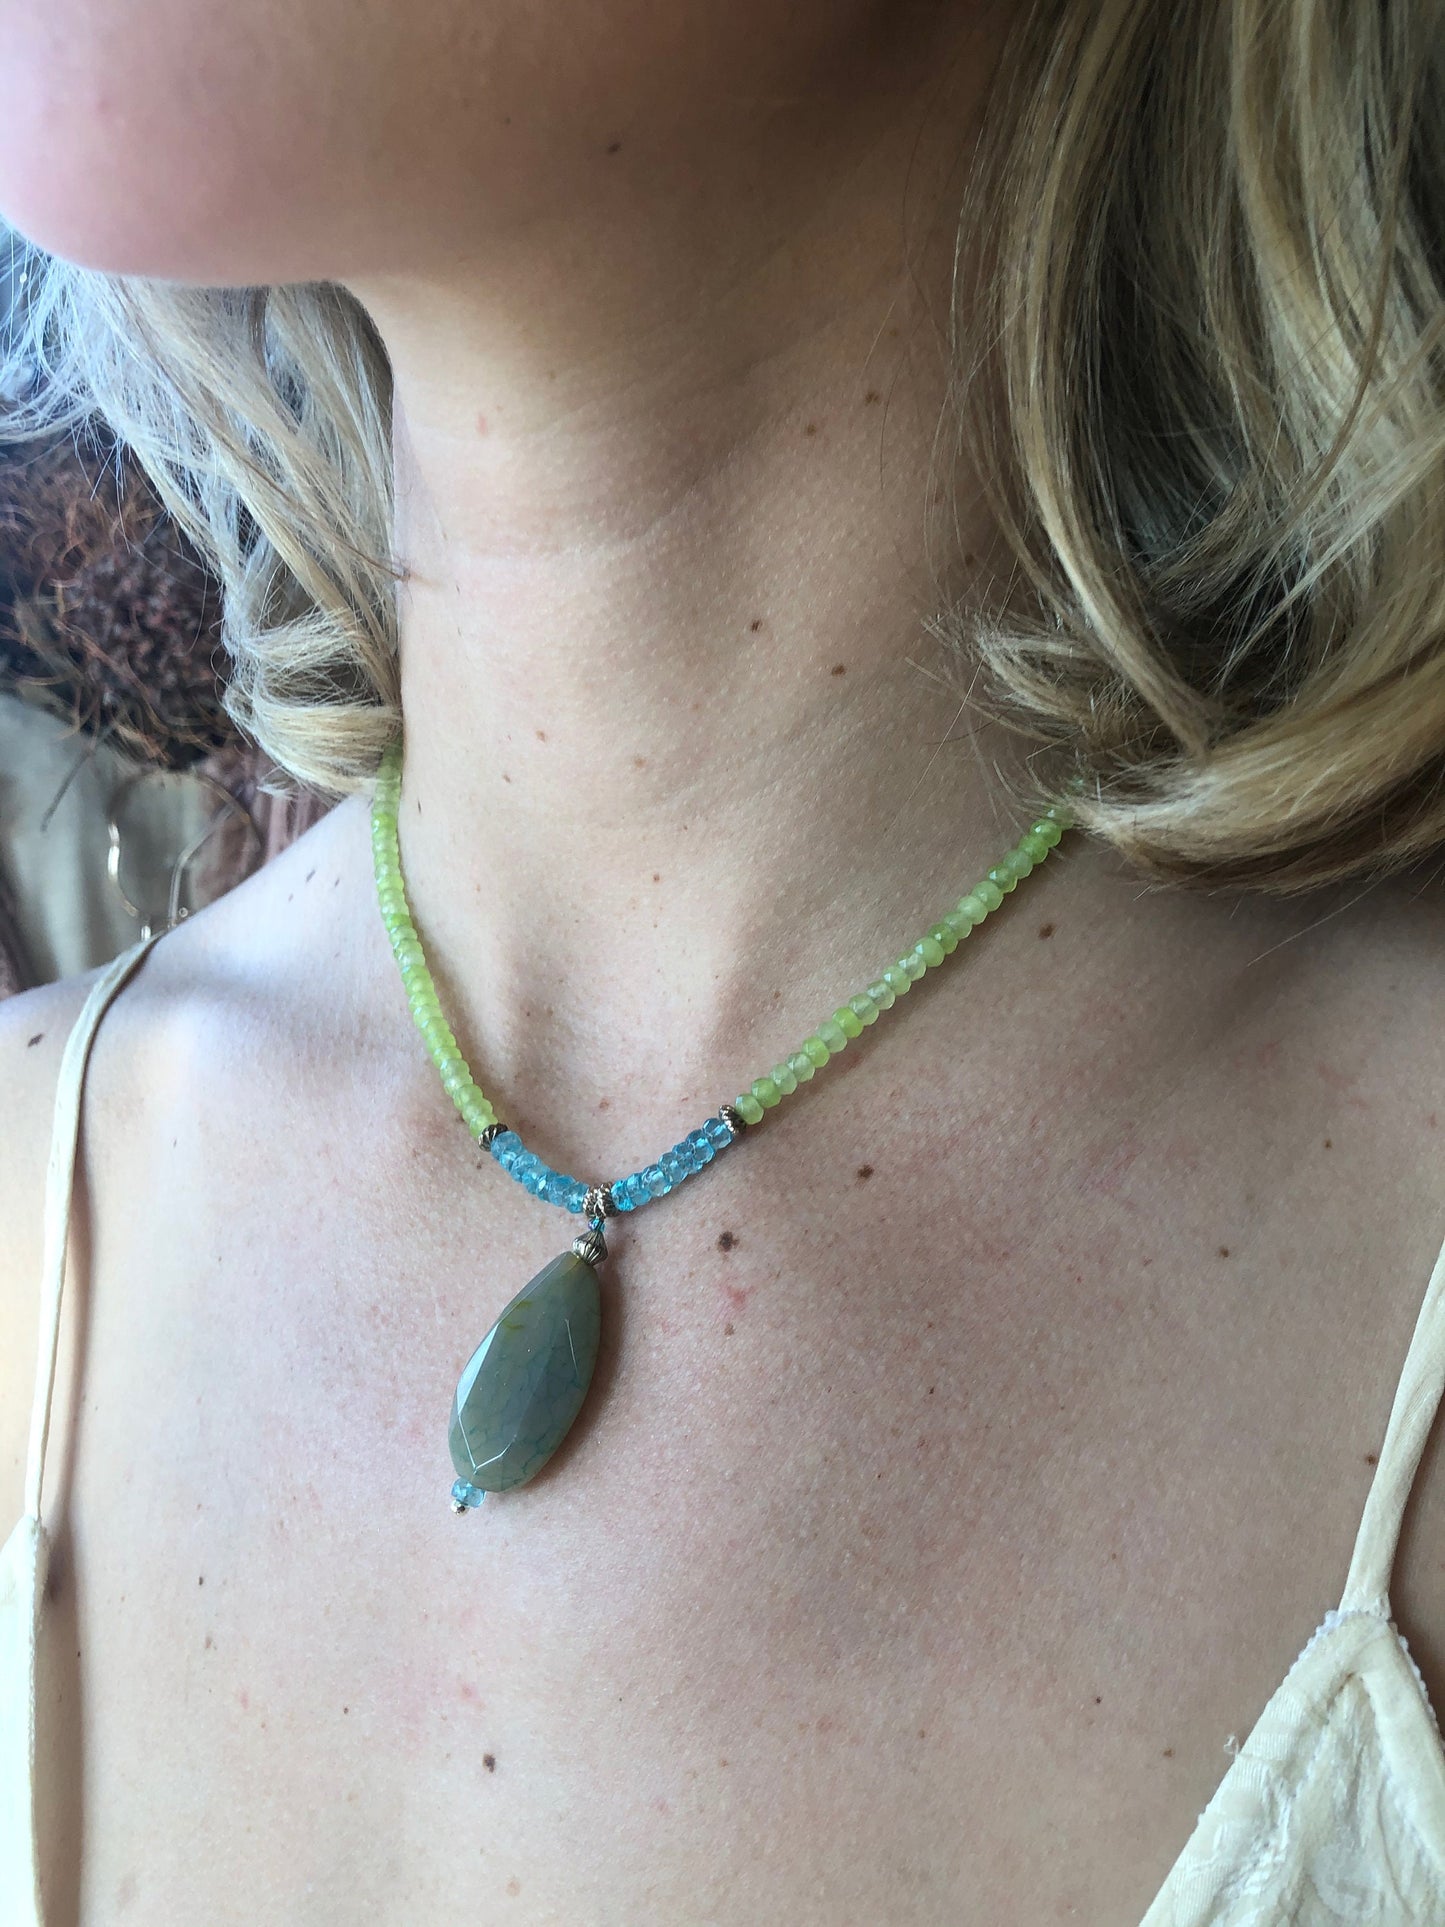 A lovely peridot beaded necklace, accented with tourmaline beads and an agate drop stone.